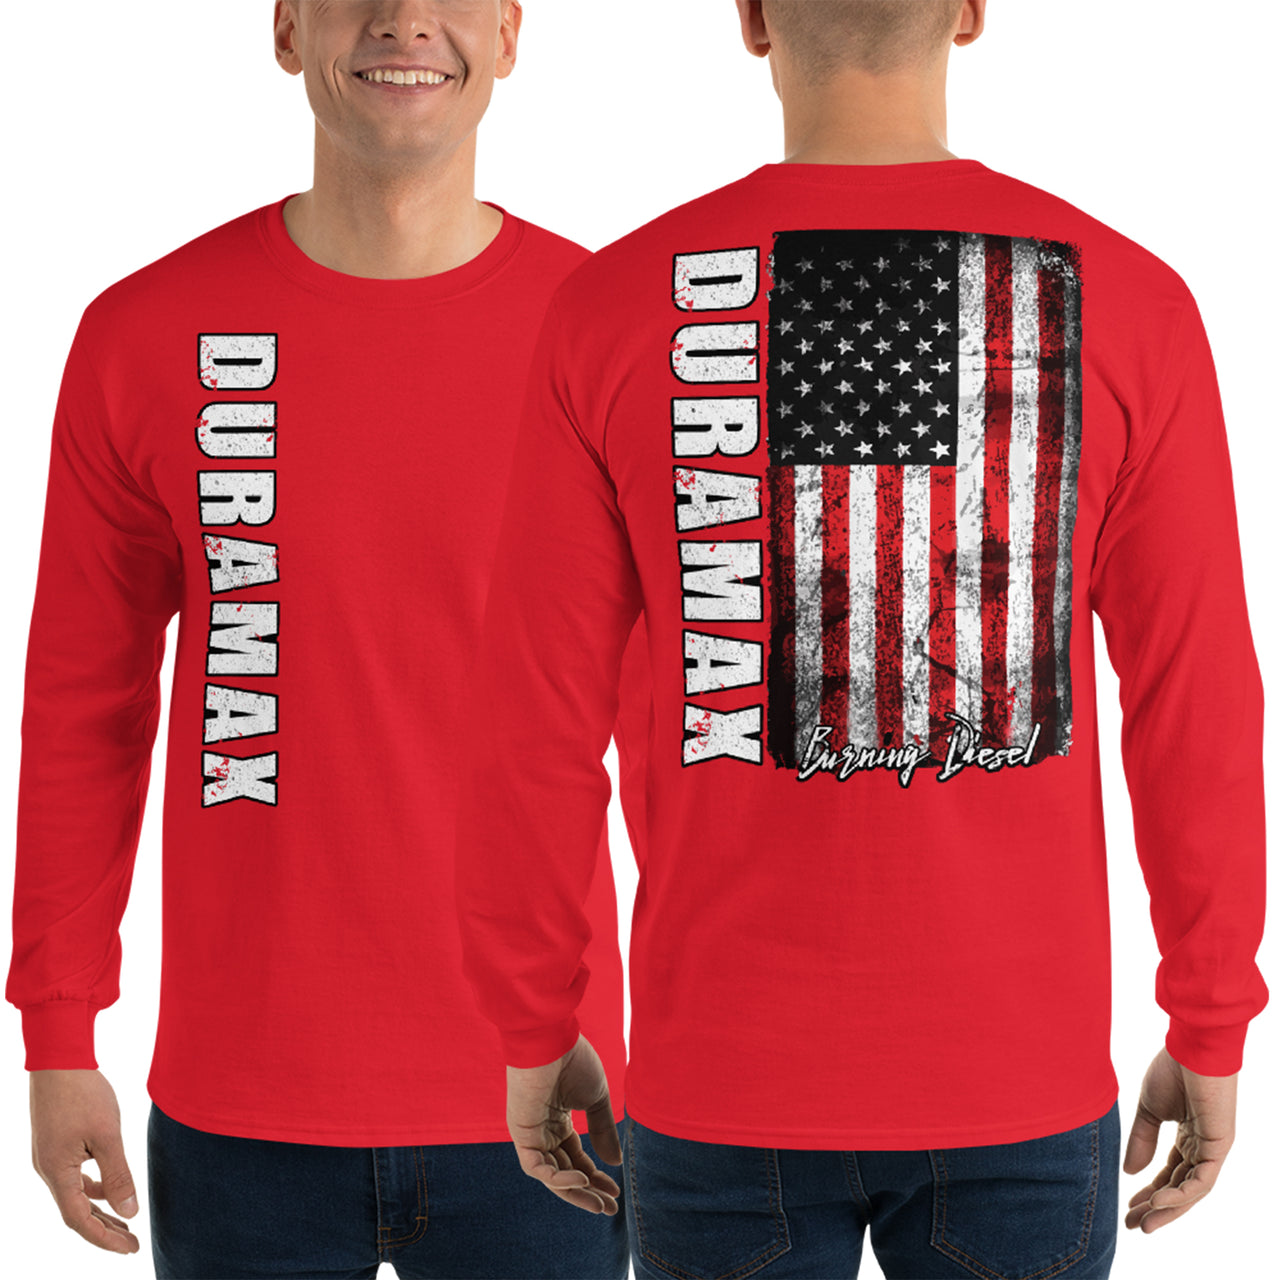 Duramax Shirt With American Flag Design Mens Long Sleeve T-Shirt modeled in red